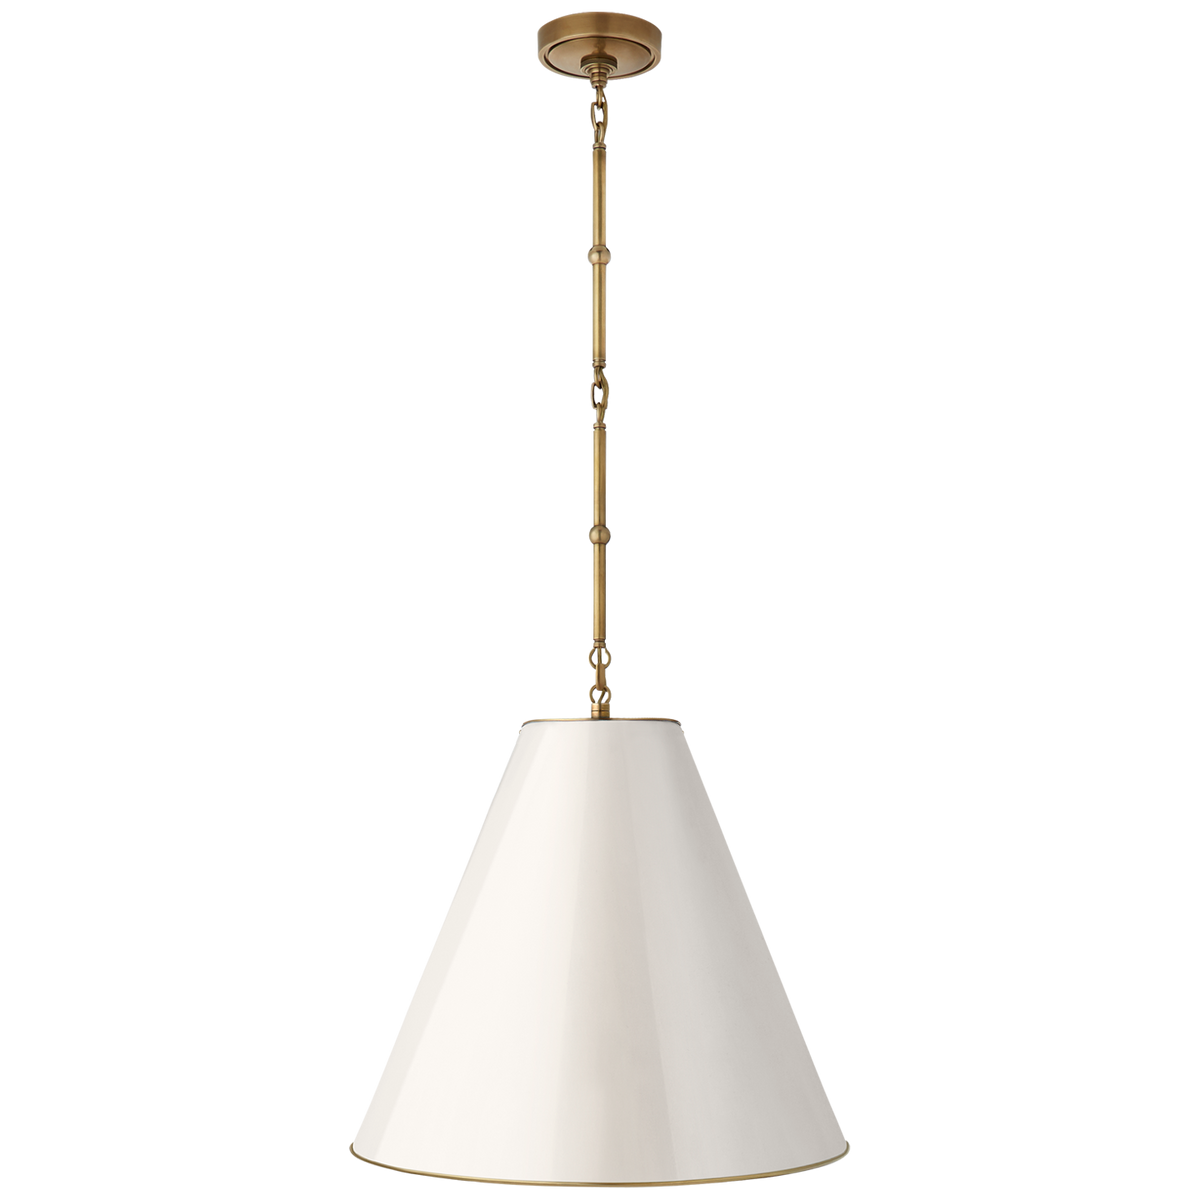 Goodman Hanging Light Medium - Hand Rubbed Antique Brass with Antique White Shade